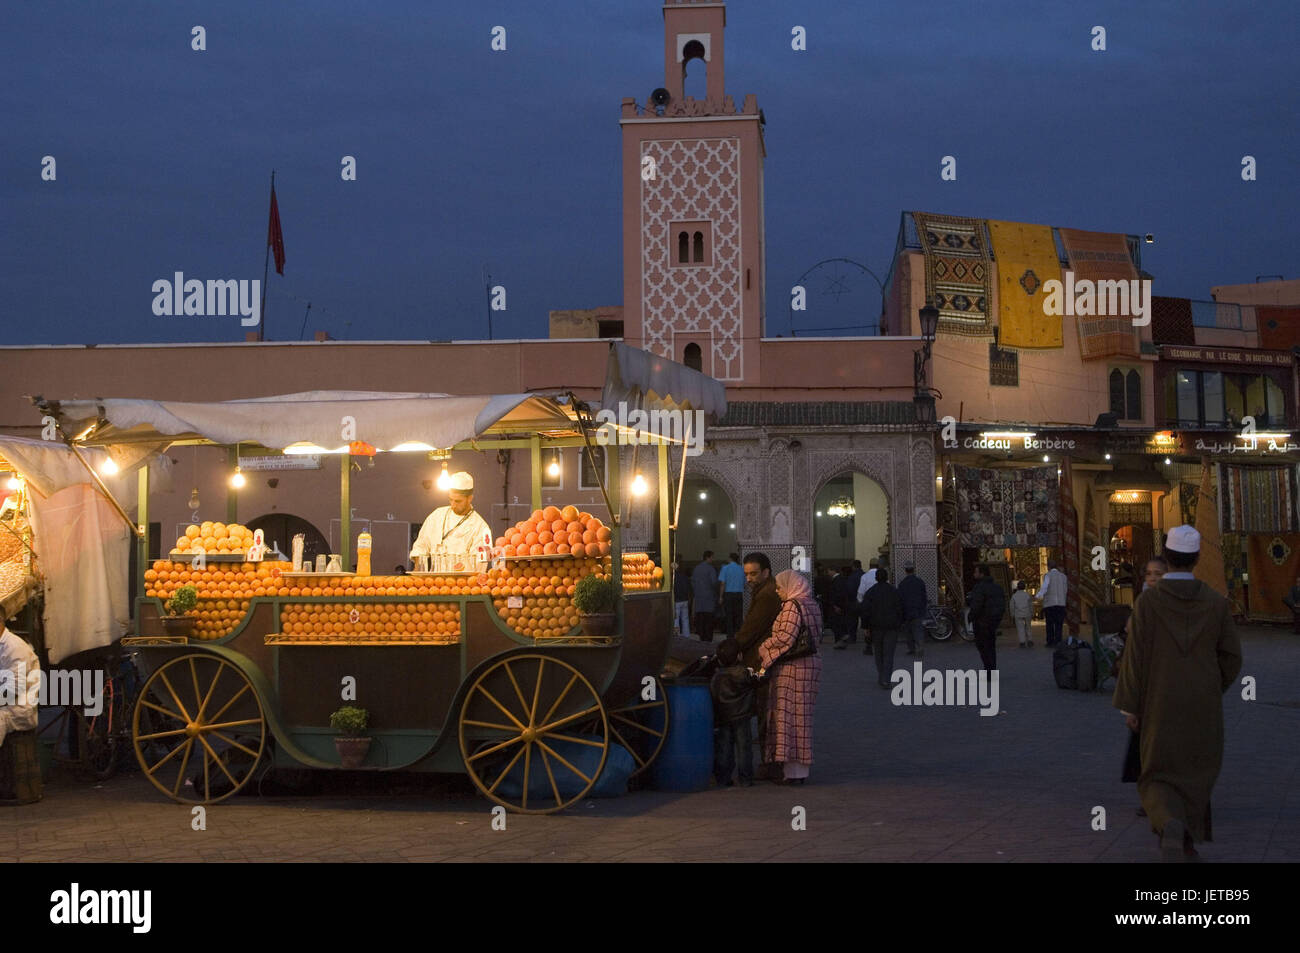 Morocco, Marrakech, Jemaa-El-Fna square, sales booth, Oozeable, oranges, people, dusk, Africa, North Africa, marketplace, market, street scene, pedestrian, passer-by, outside, dusk, beach, street sales, market stall, carriage, fruit juice, orange juice, fruits, many, Stock Photo